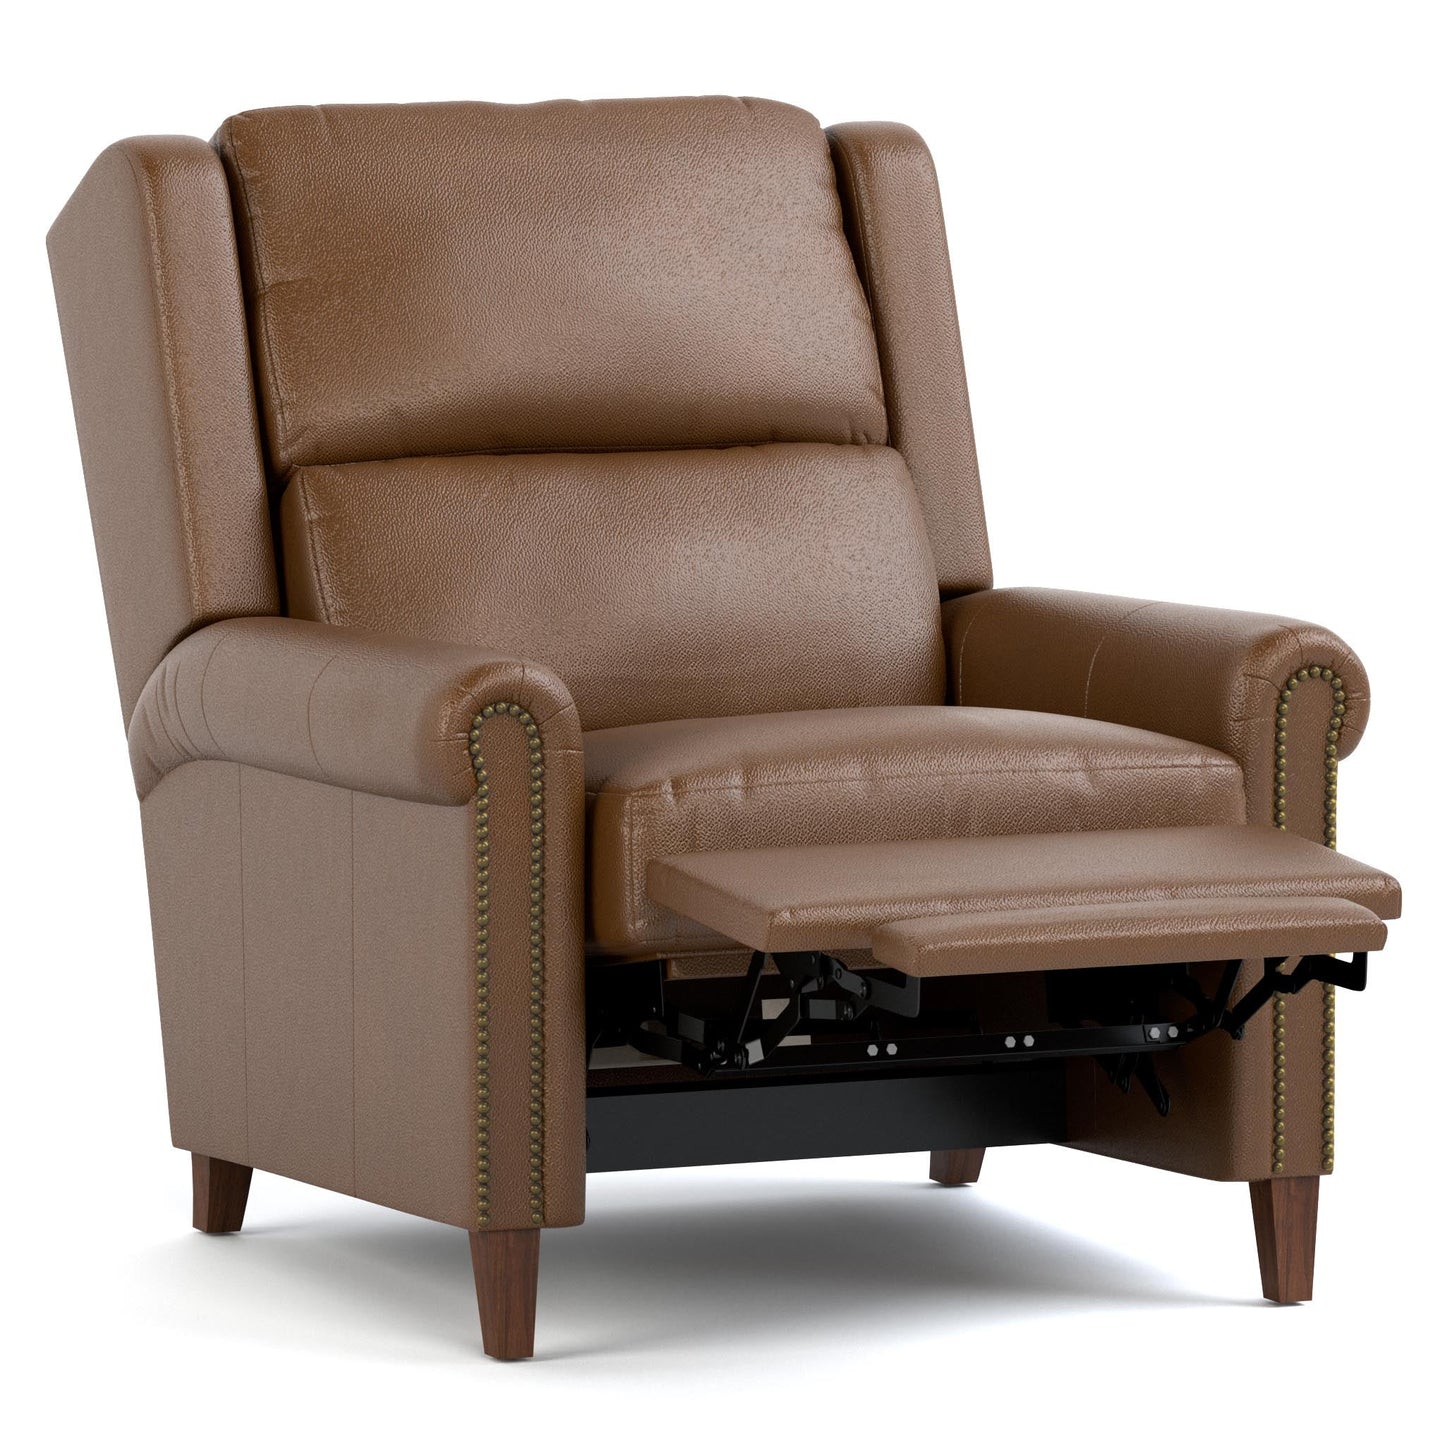 Woodlands Small Roll Arm Power Recliner with Nails Selvano Bark - Angle